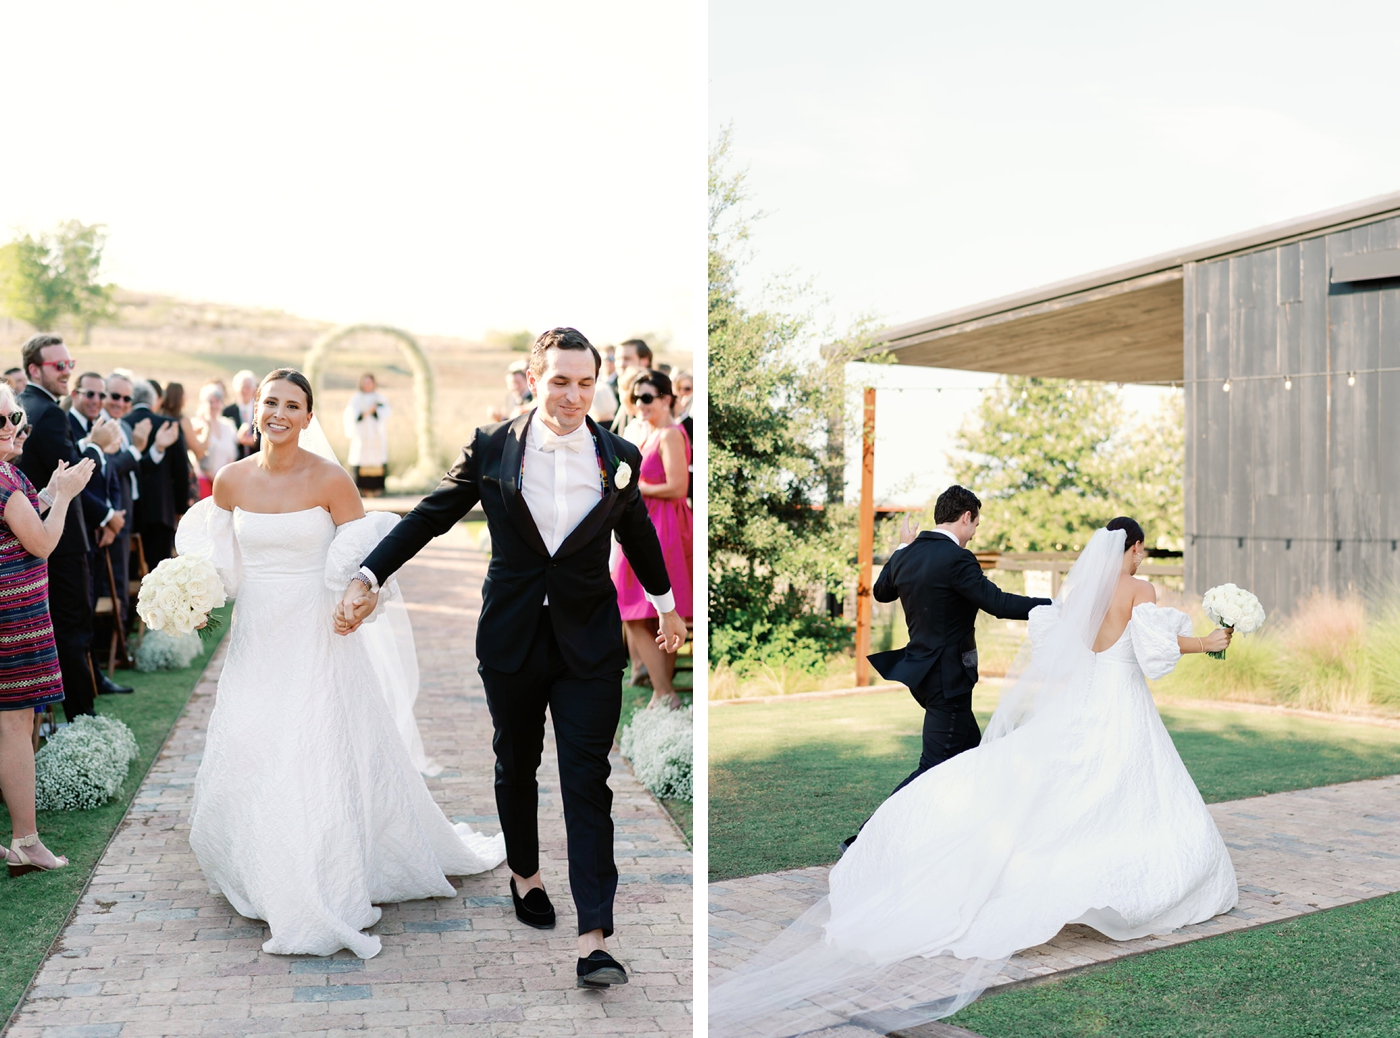 Bride and groom celebrating after their outdoor ceremony at Two Wishes Ranch